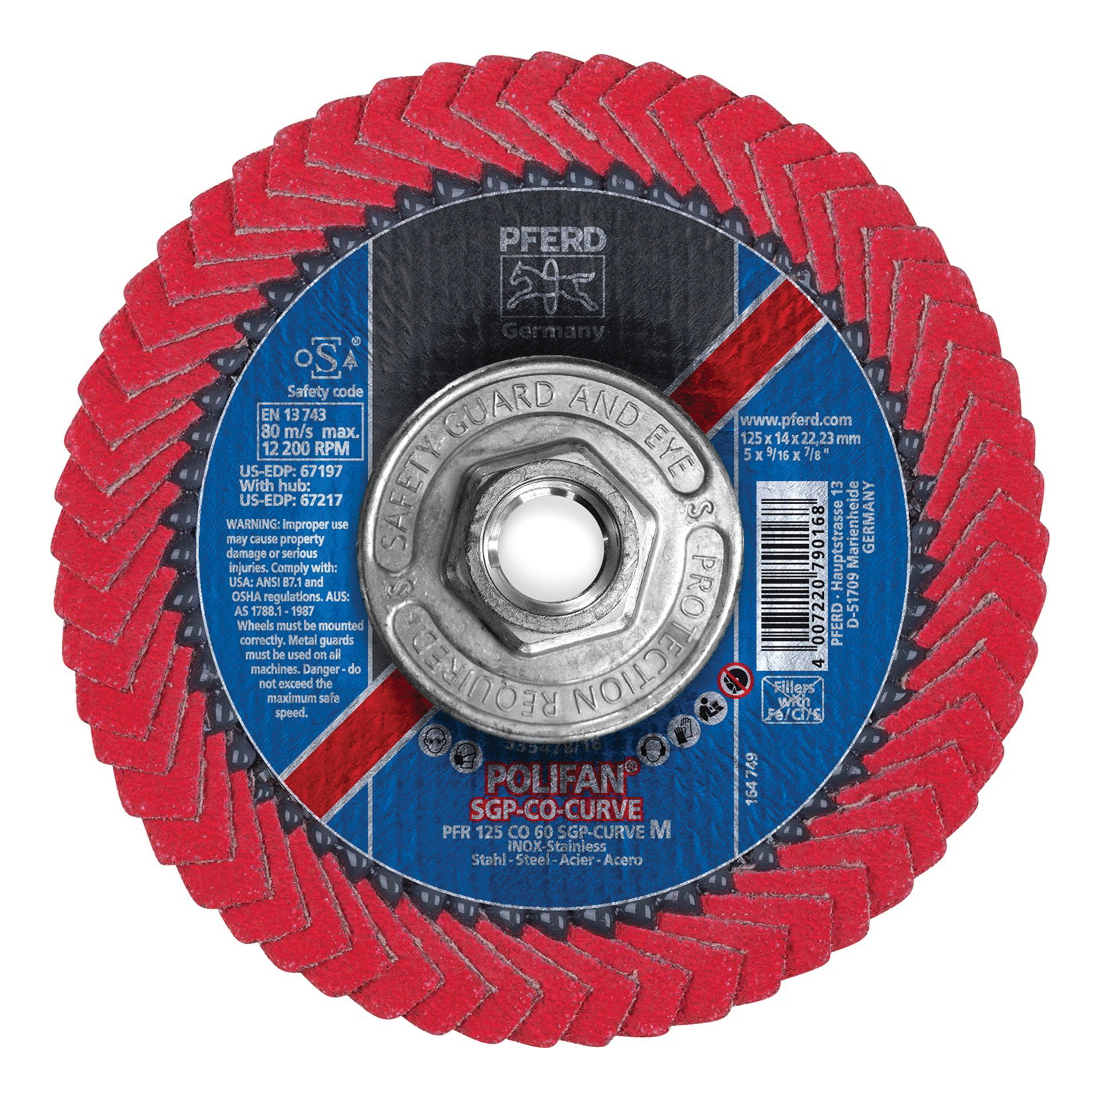 PFERD Polifan® 67217 Special Line SGP CO-CURVE Threaded Coated Abrasive Flap Disc, 5 in Dia, 60 Grit, Ceramic Oxide Abrasive, Type PFR/Radial Disc